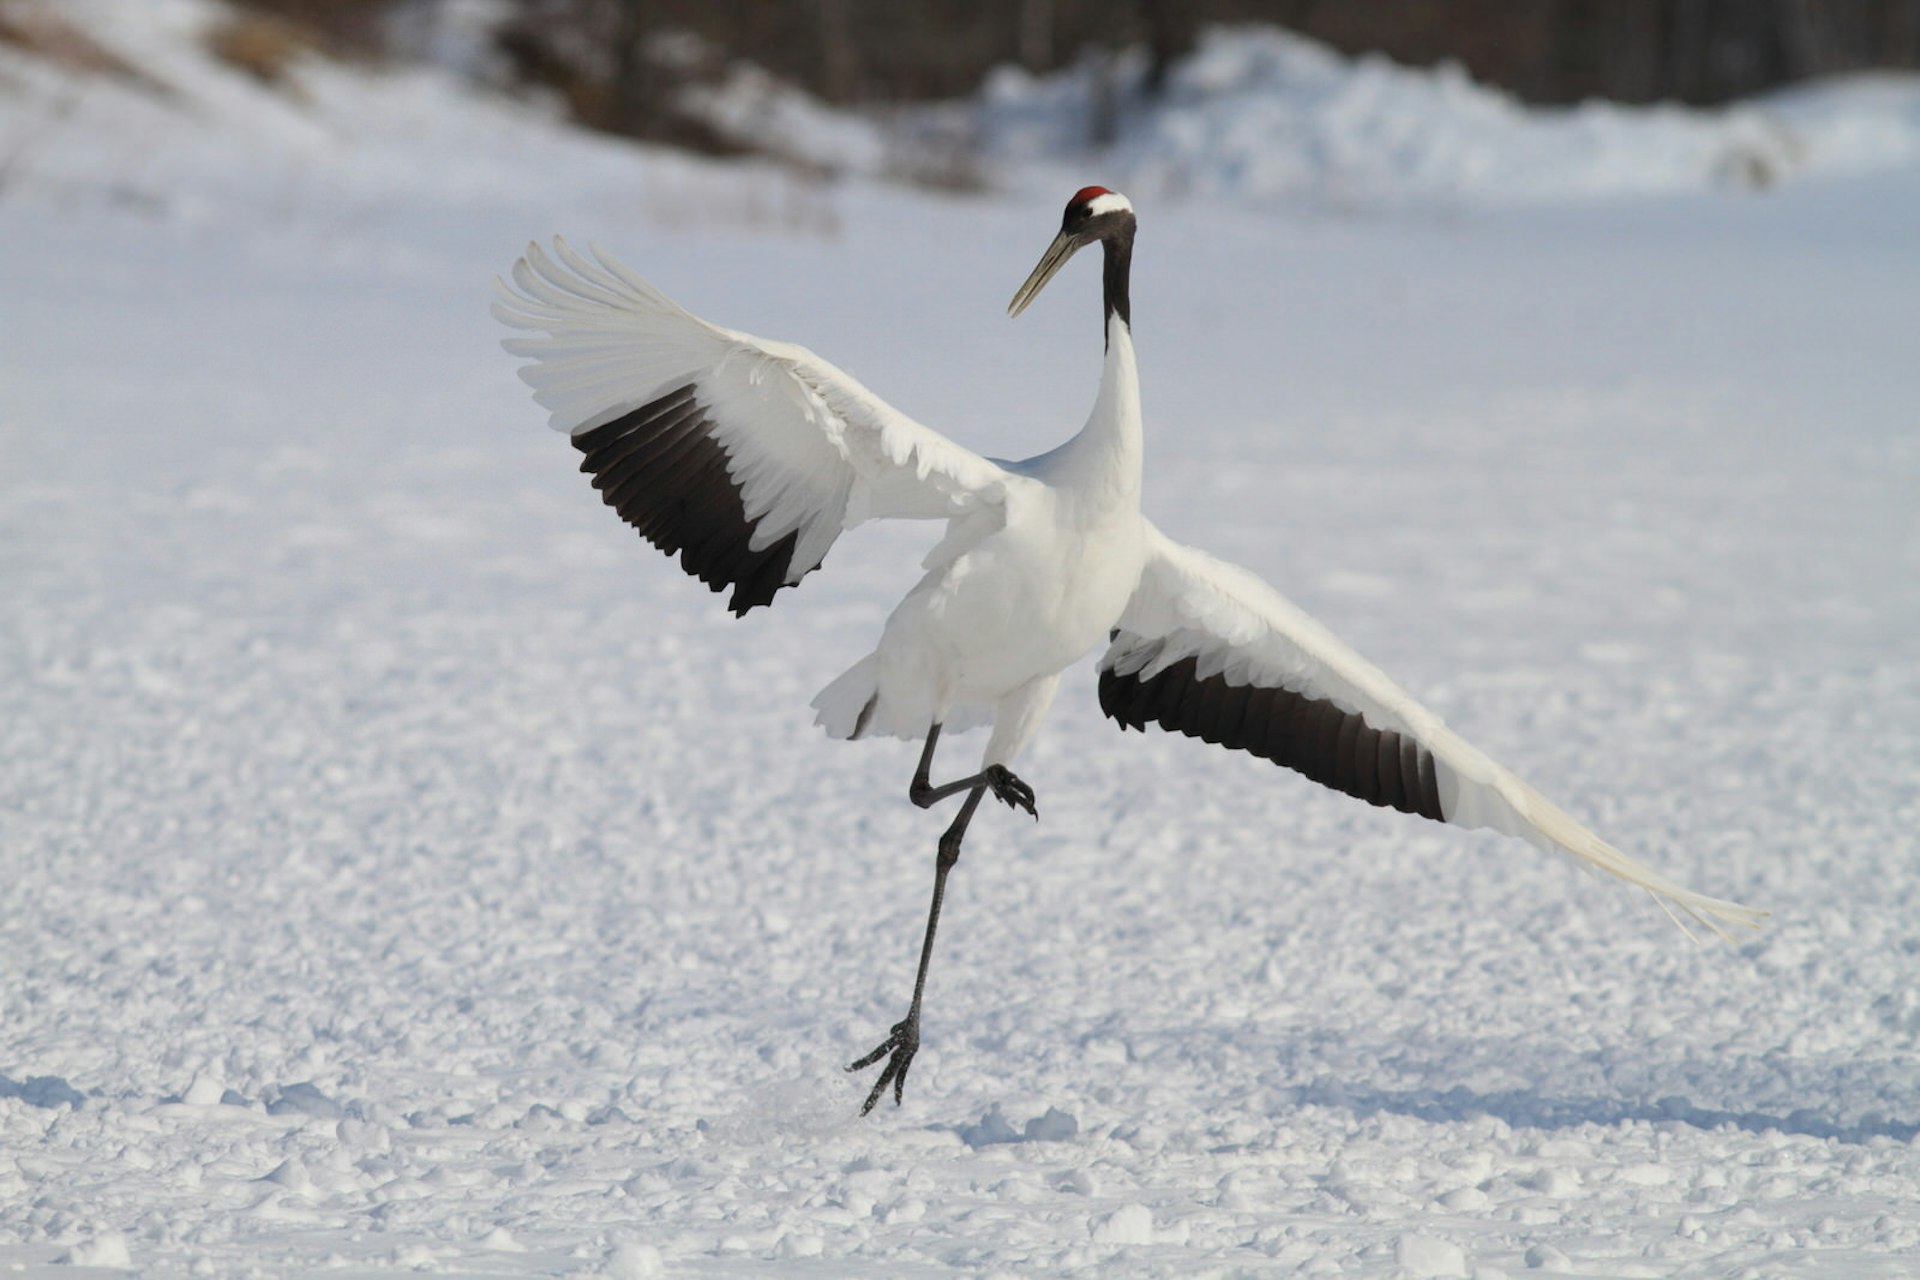 A single Japanese crane in the snow with outstretched wings